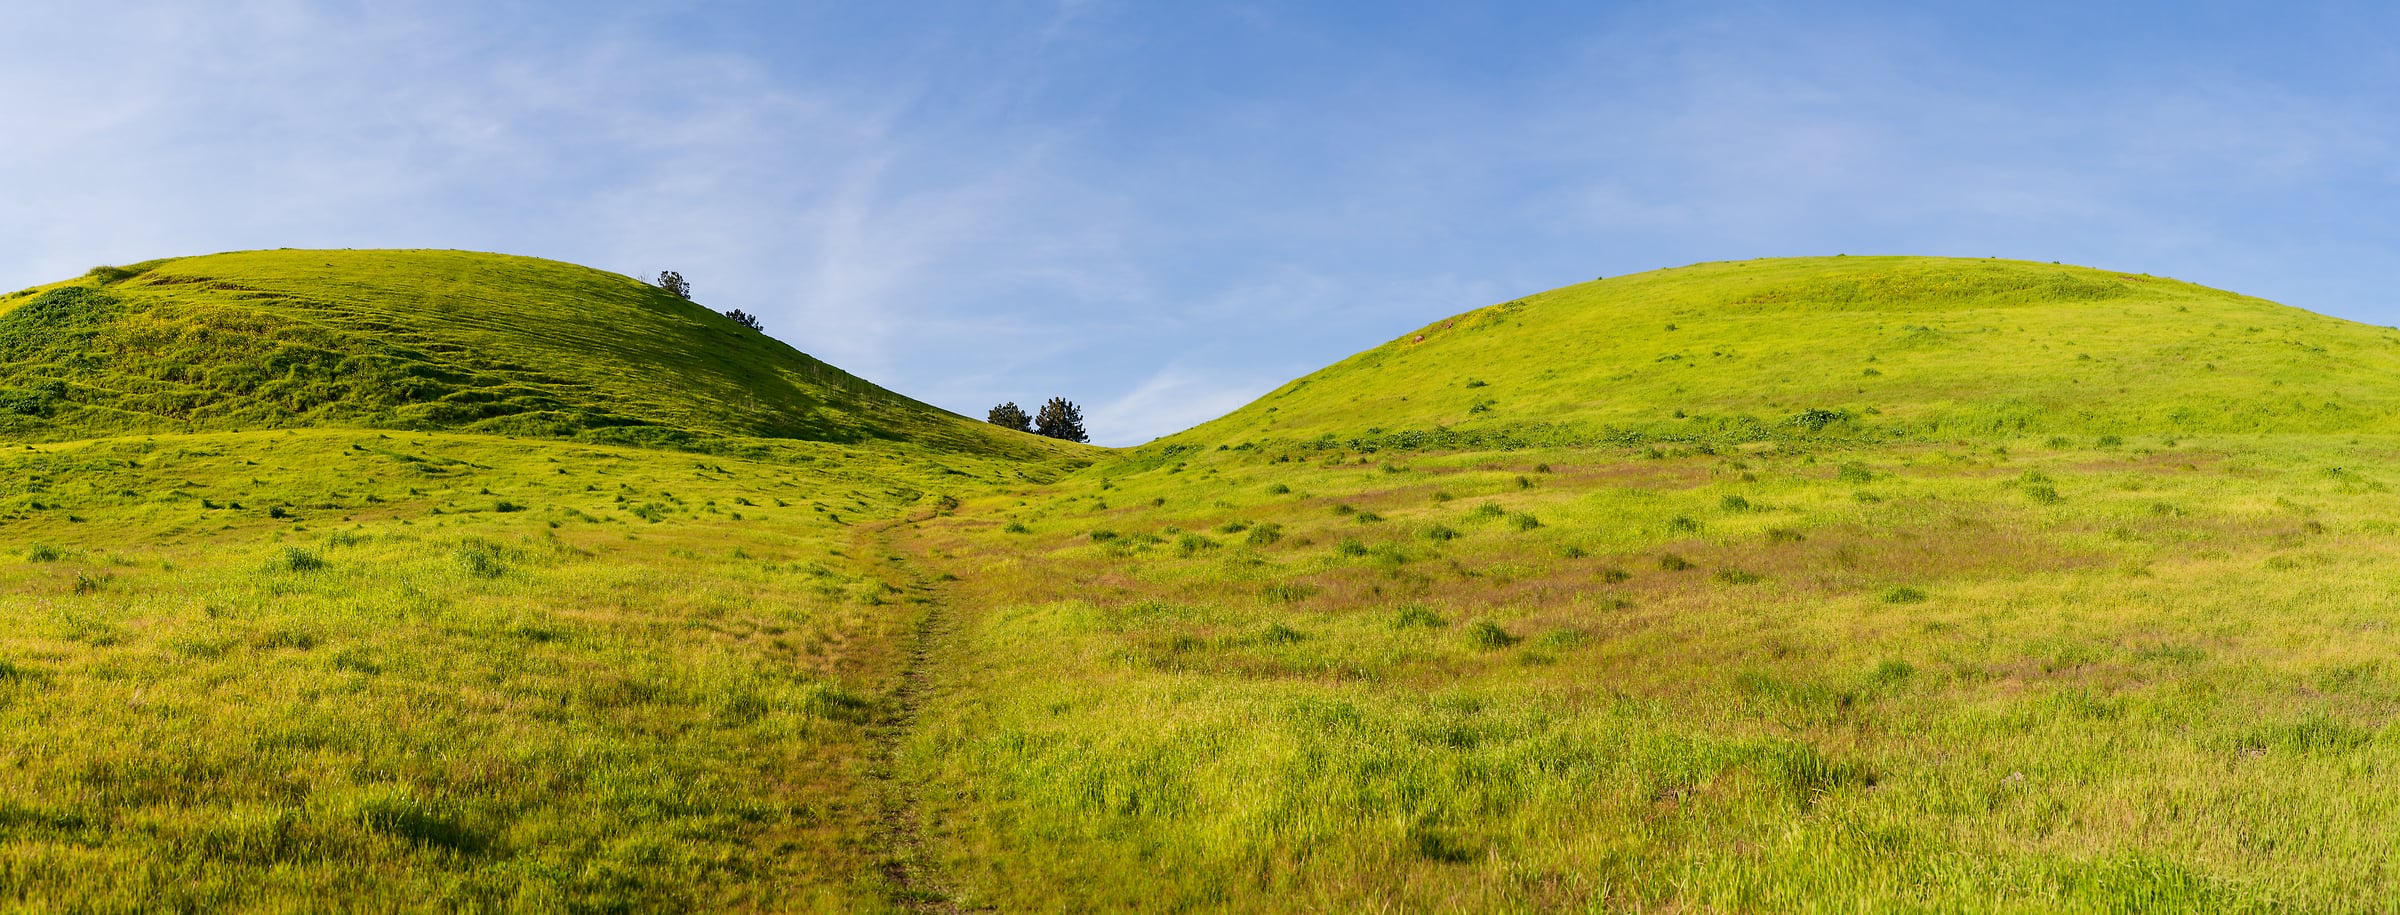 246 megapixels! A very high resolution, large-format VAST photo print of two green, grass-covered hills; landscape photograph created by Jeff Lewis in San Jose, California.